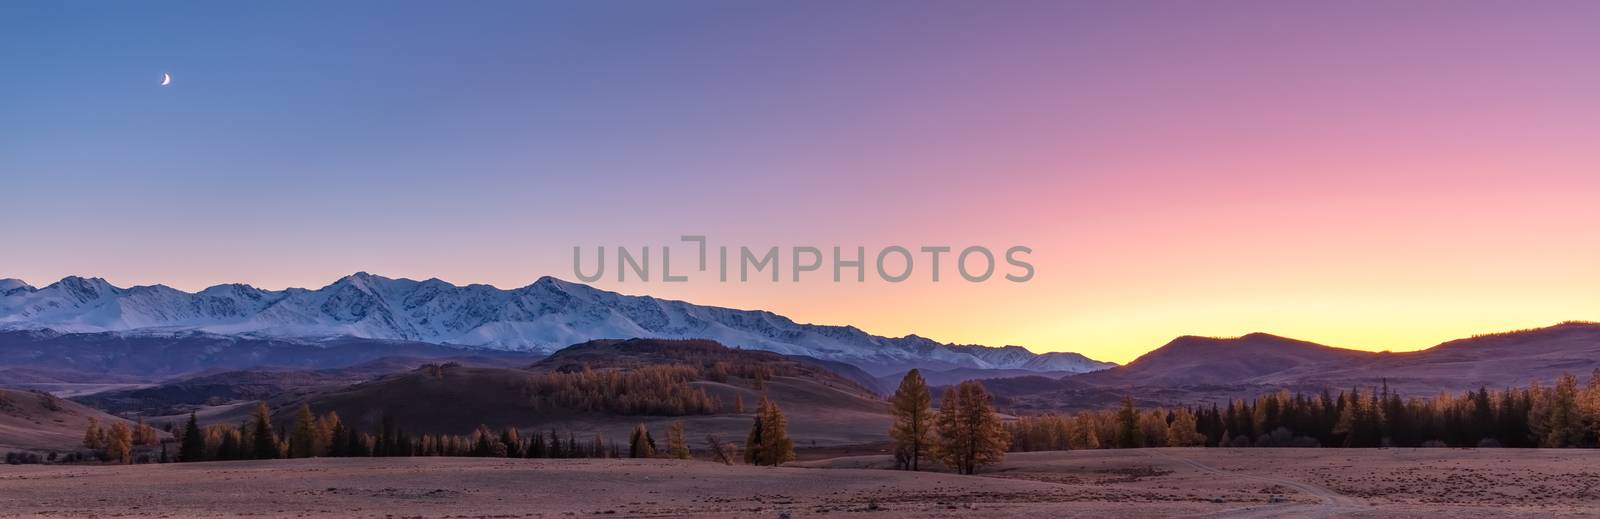 Beautiful panorama of a valley full of trees and white snowy mountains in the background. Sky is blue, orange, pink, and purple. Blue hour. Fall time. Sunset. Altai mountains, Russia by DamantisZ